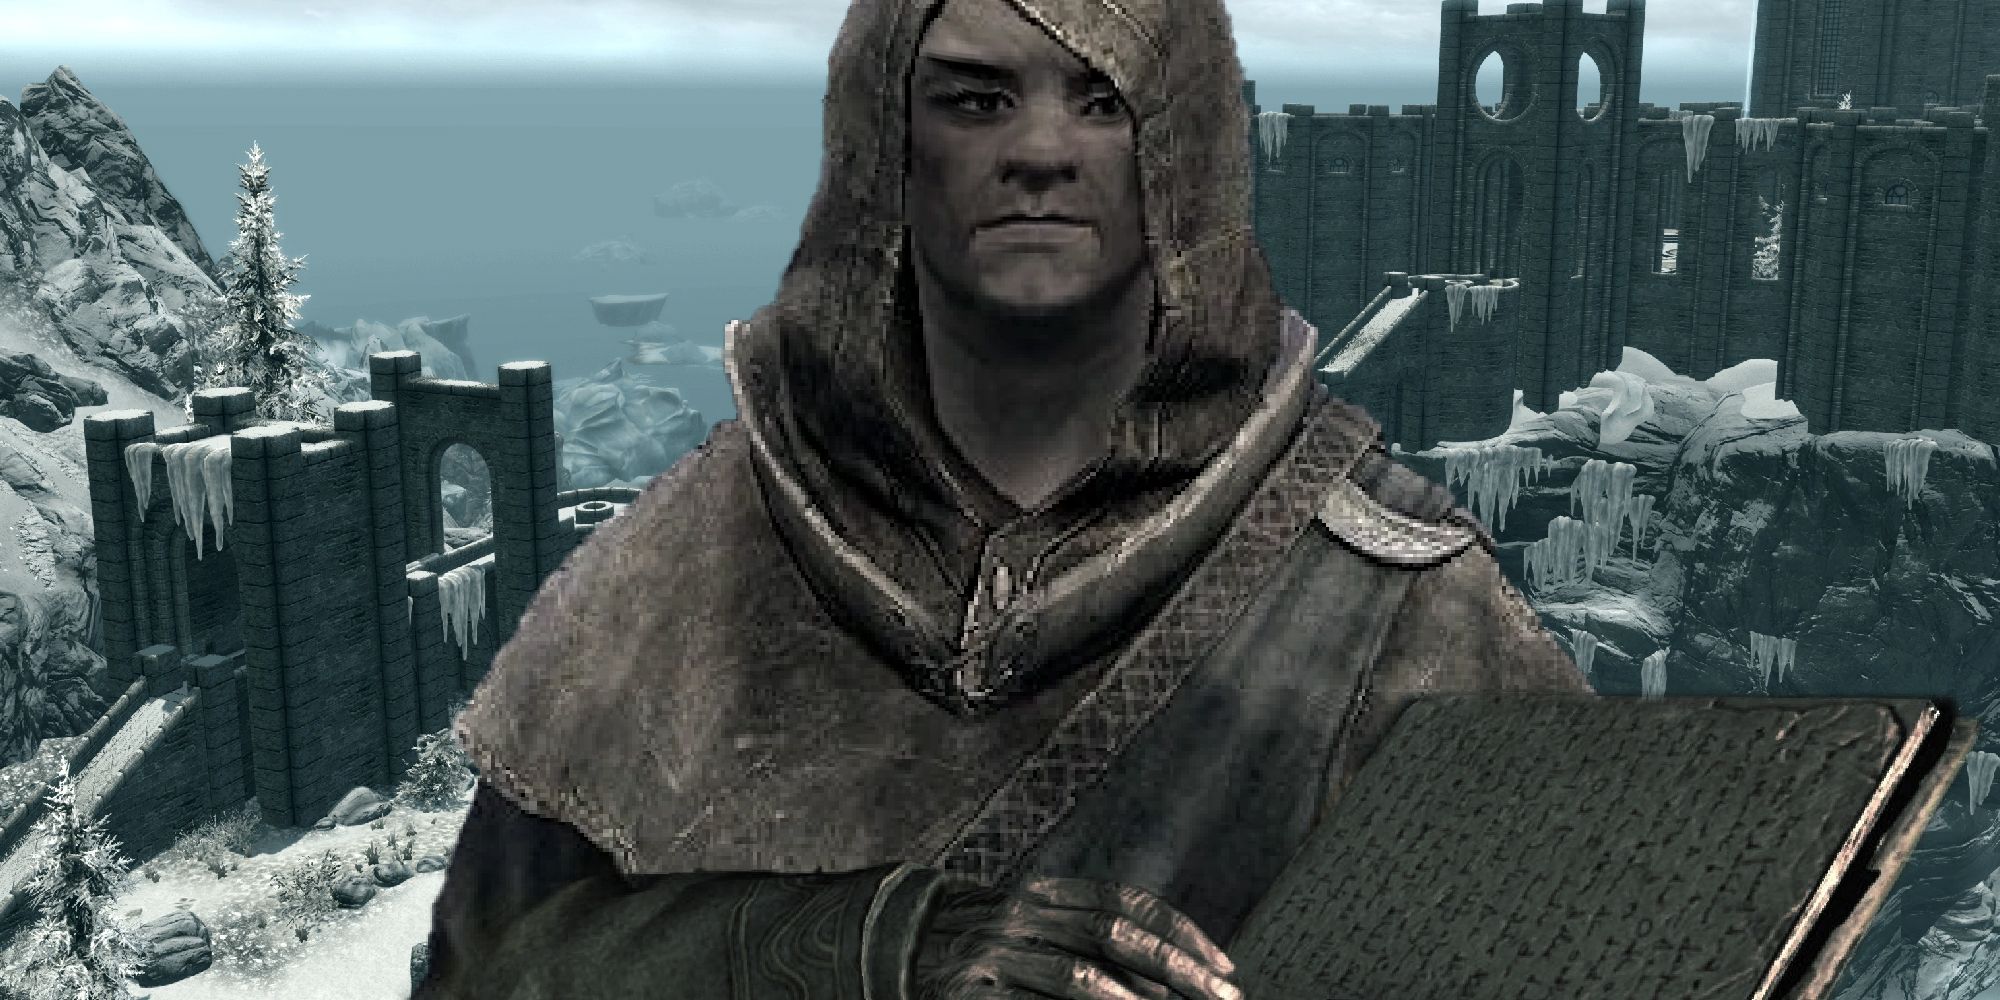 Skyrim Mod Lets You Roleplay As An Actual College Of Winterhold Student